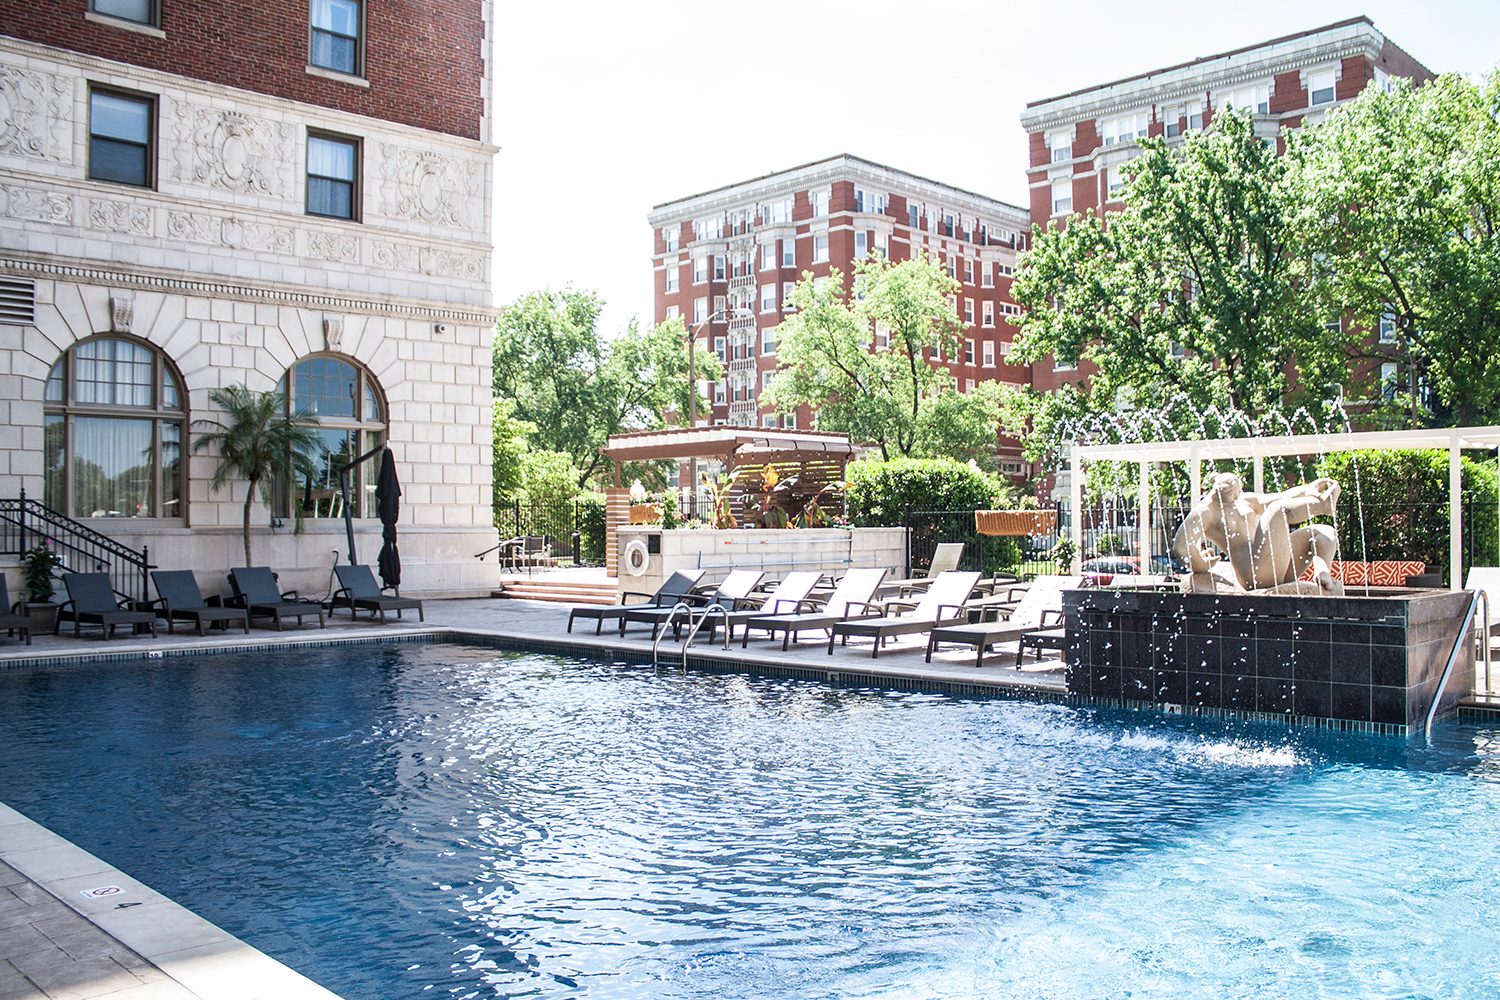 05stlouis-chaseparkplaza-hotel-pool-travel-style